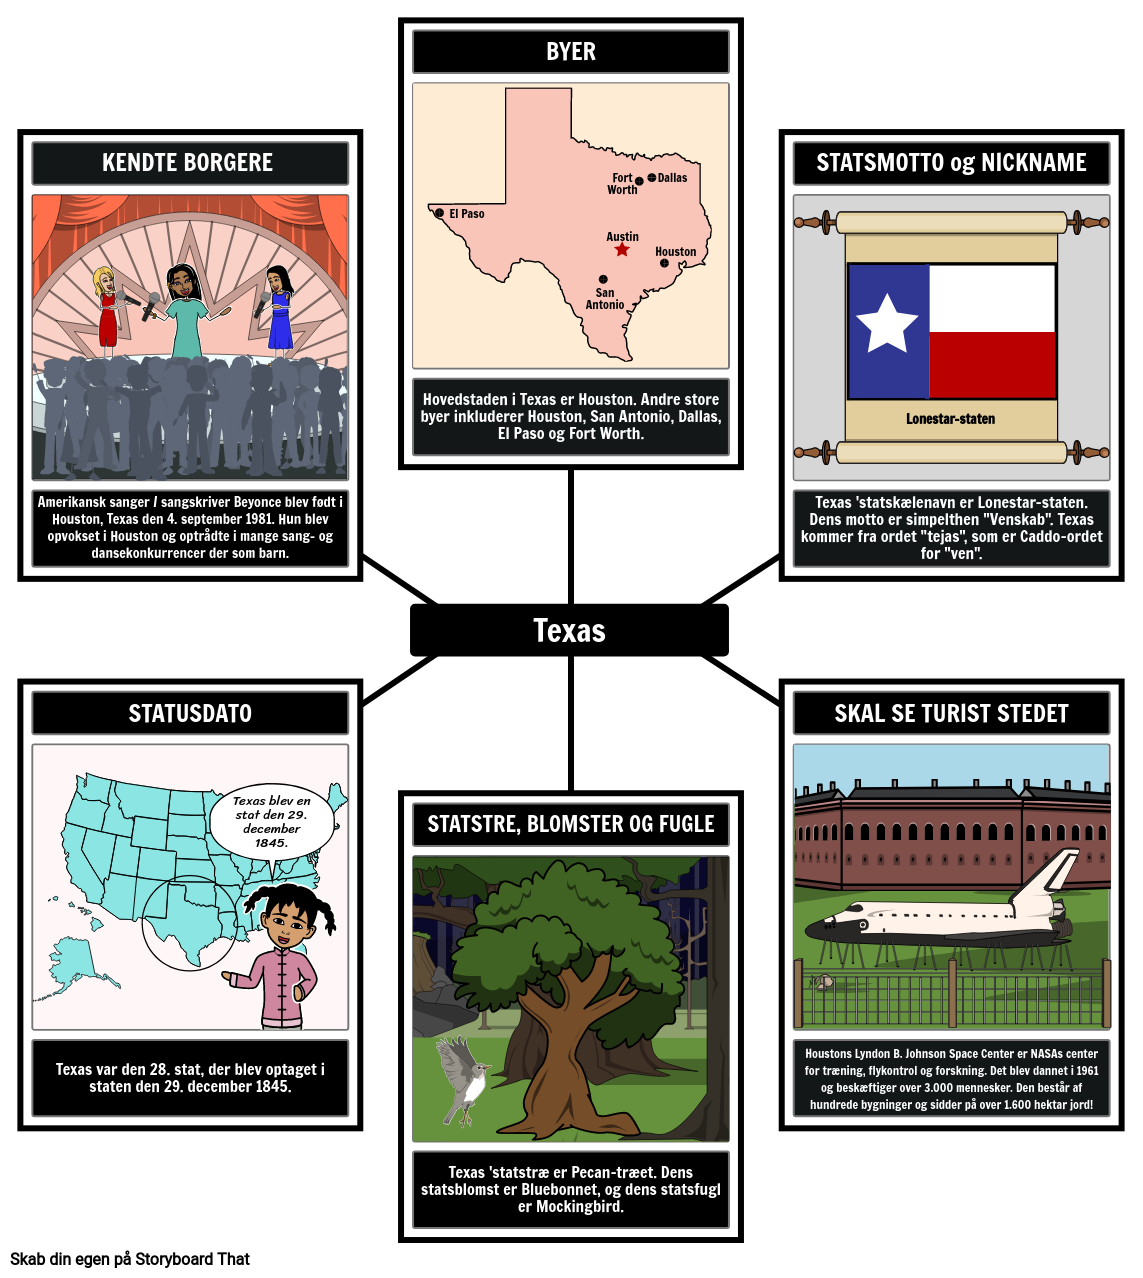 Texas State Information